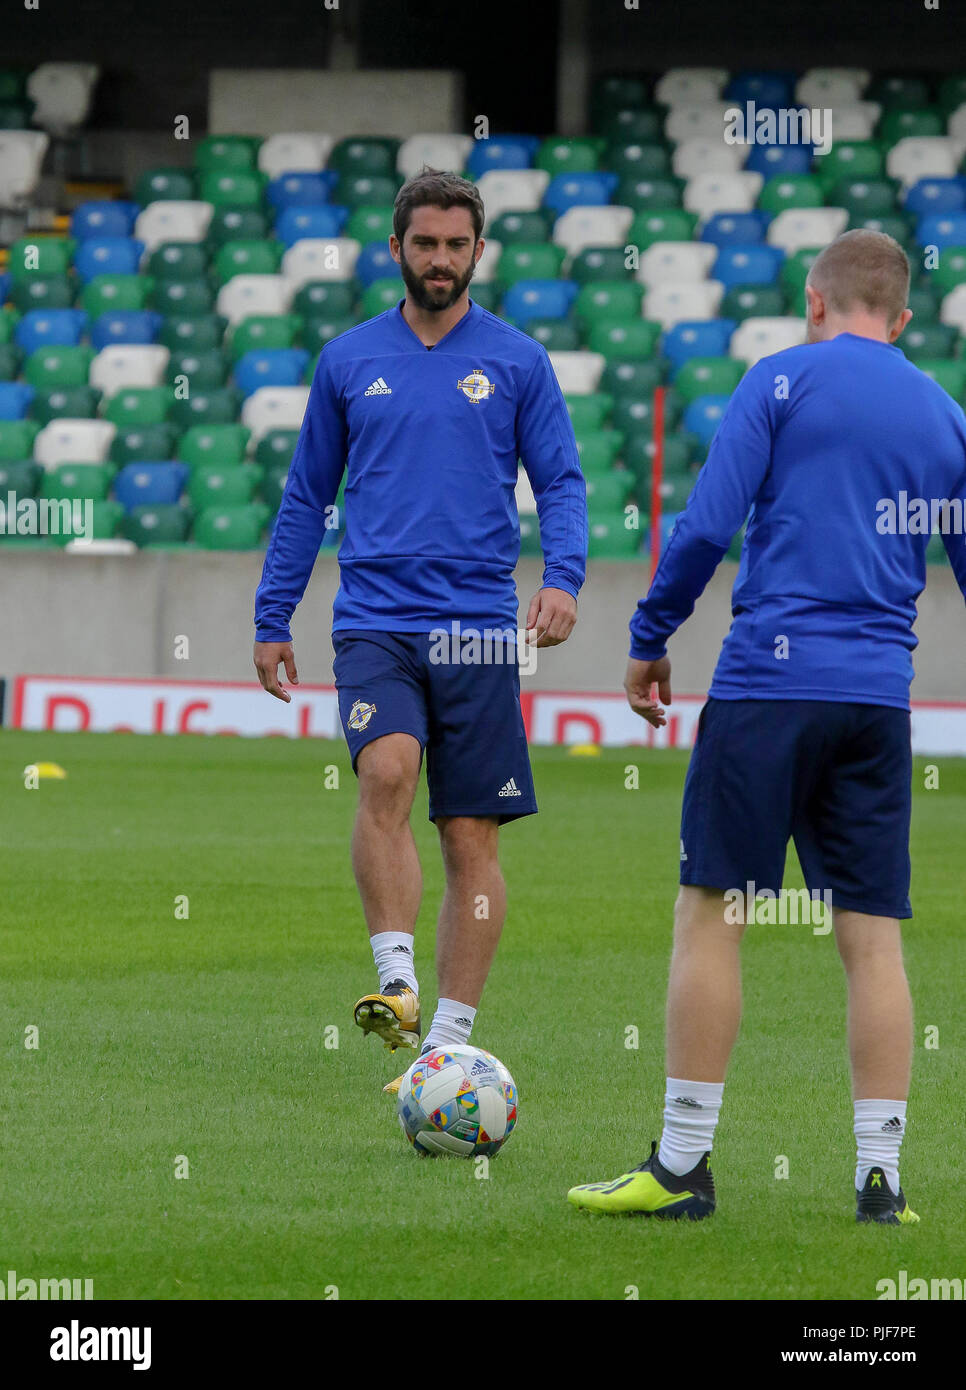 Windsor Park, Belfast, Northern Ireland. 07 September 2018. Northern Ireland in training this morning at Windsor Park before tomorrow night's UEFA Nations League at the stadium against Bosnia & Herzegovina. Will Grigg at training. Credit: David Hunter/Alamy Live News. Stock Photo